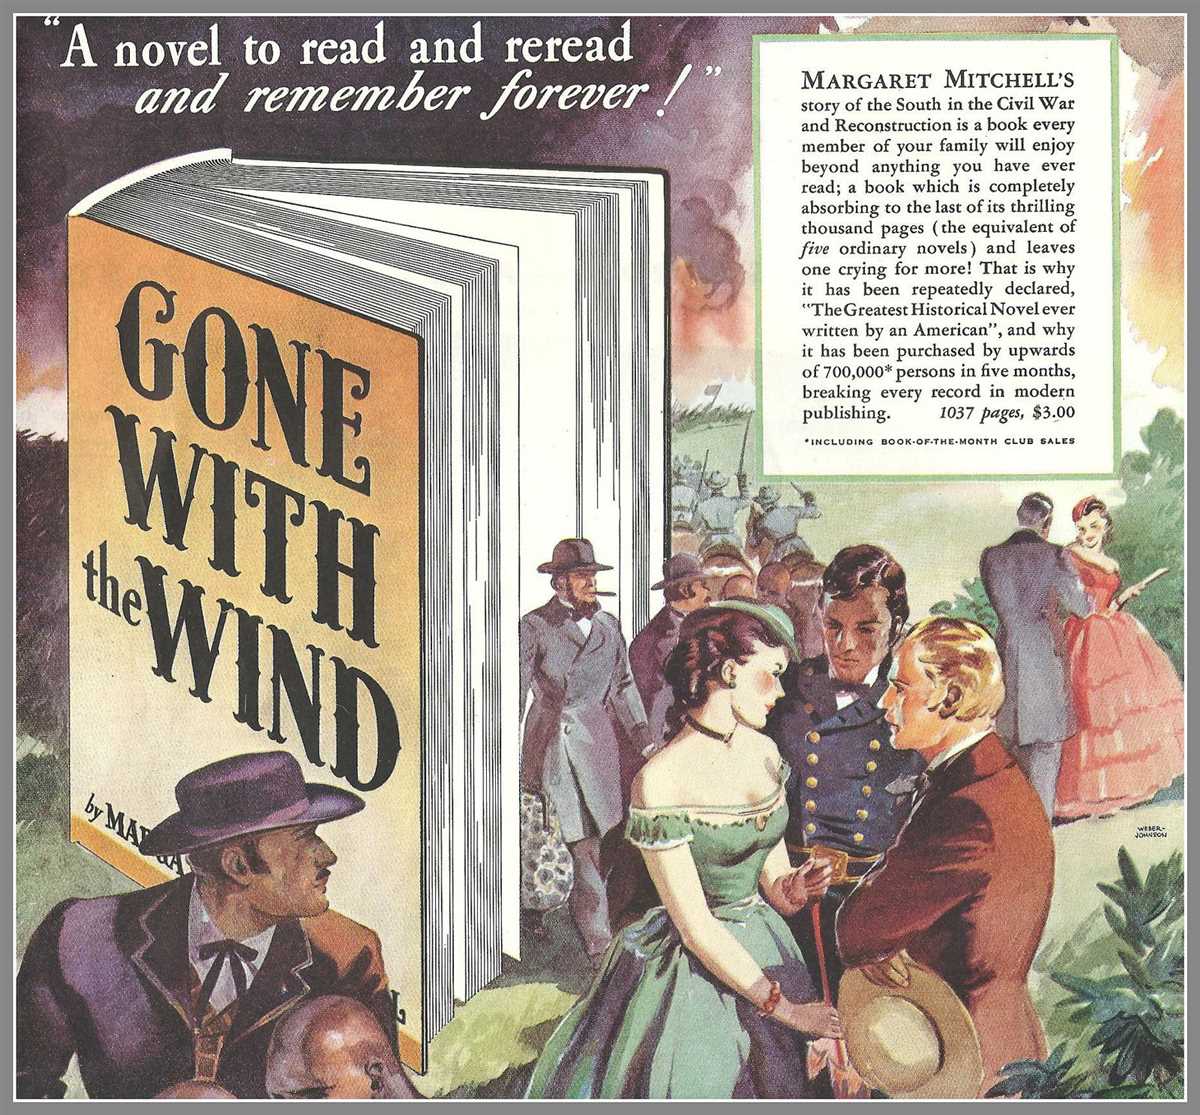 4. What is the historical context of Gone with the Wind?